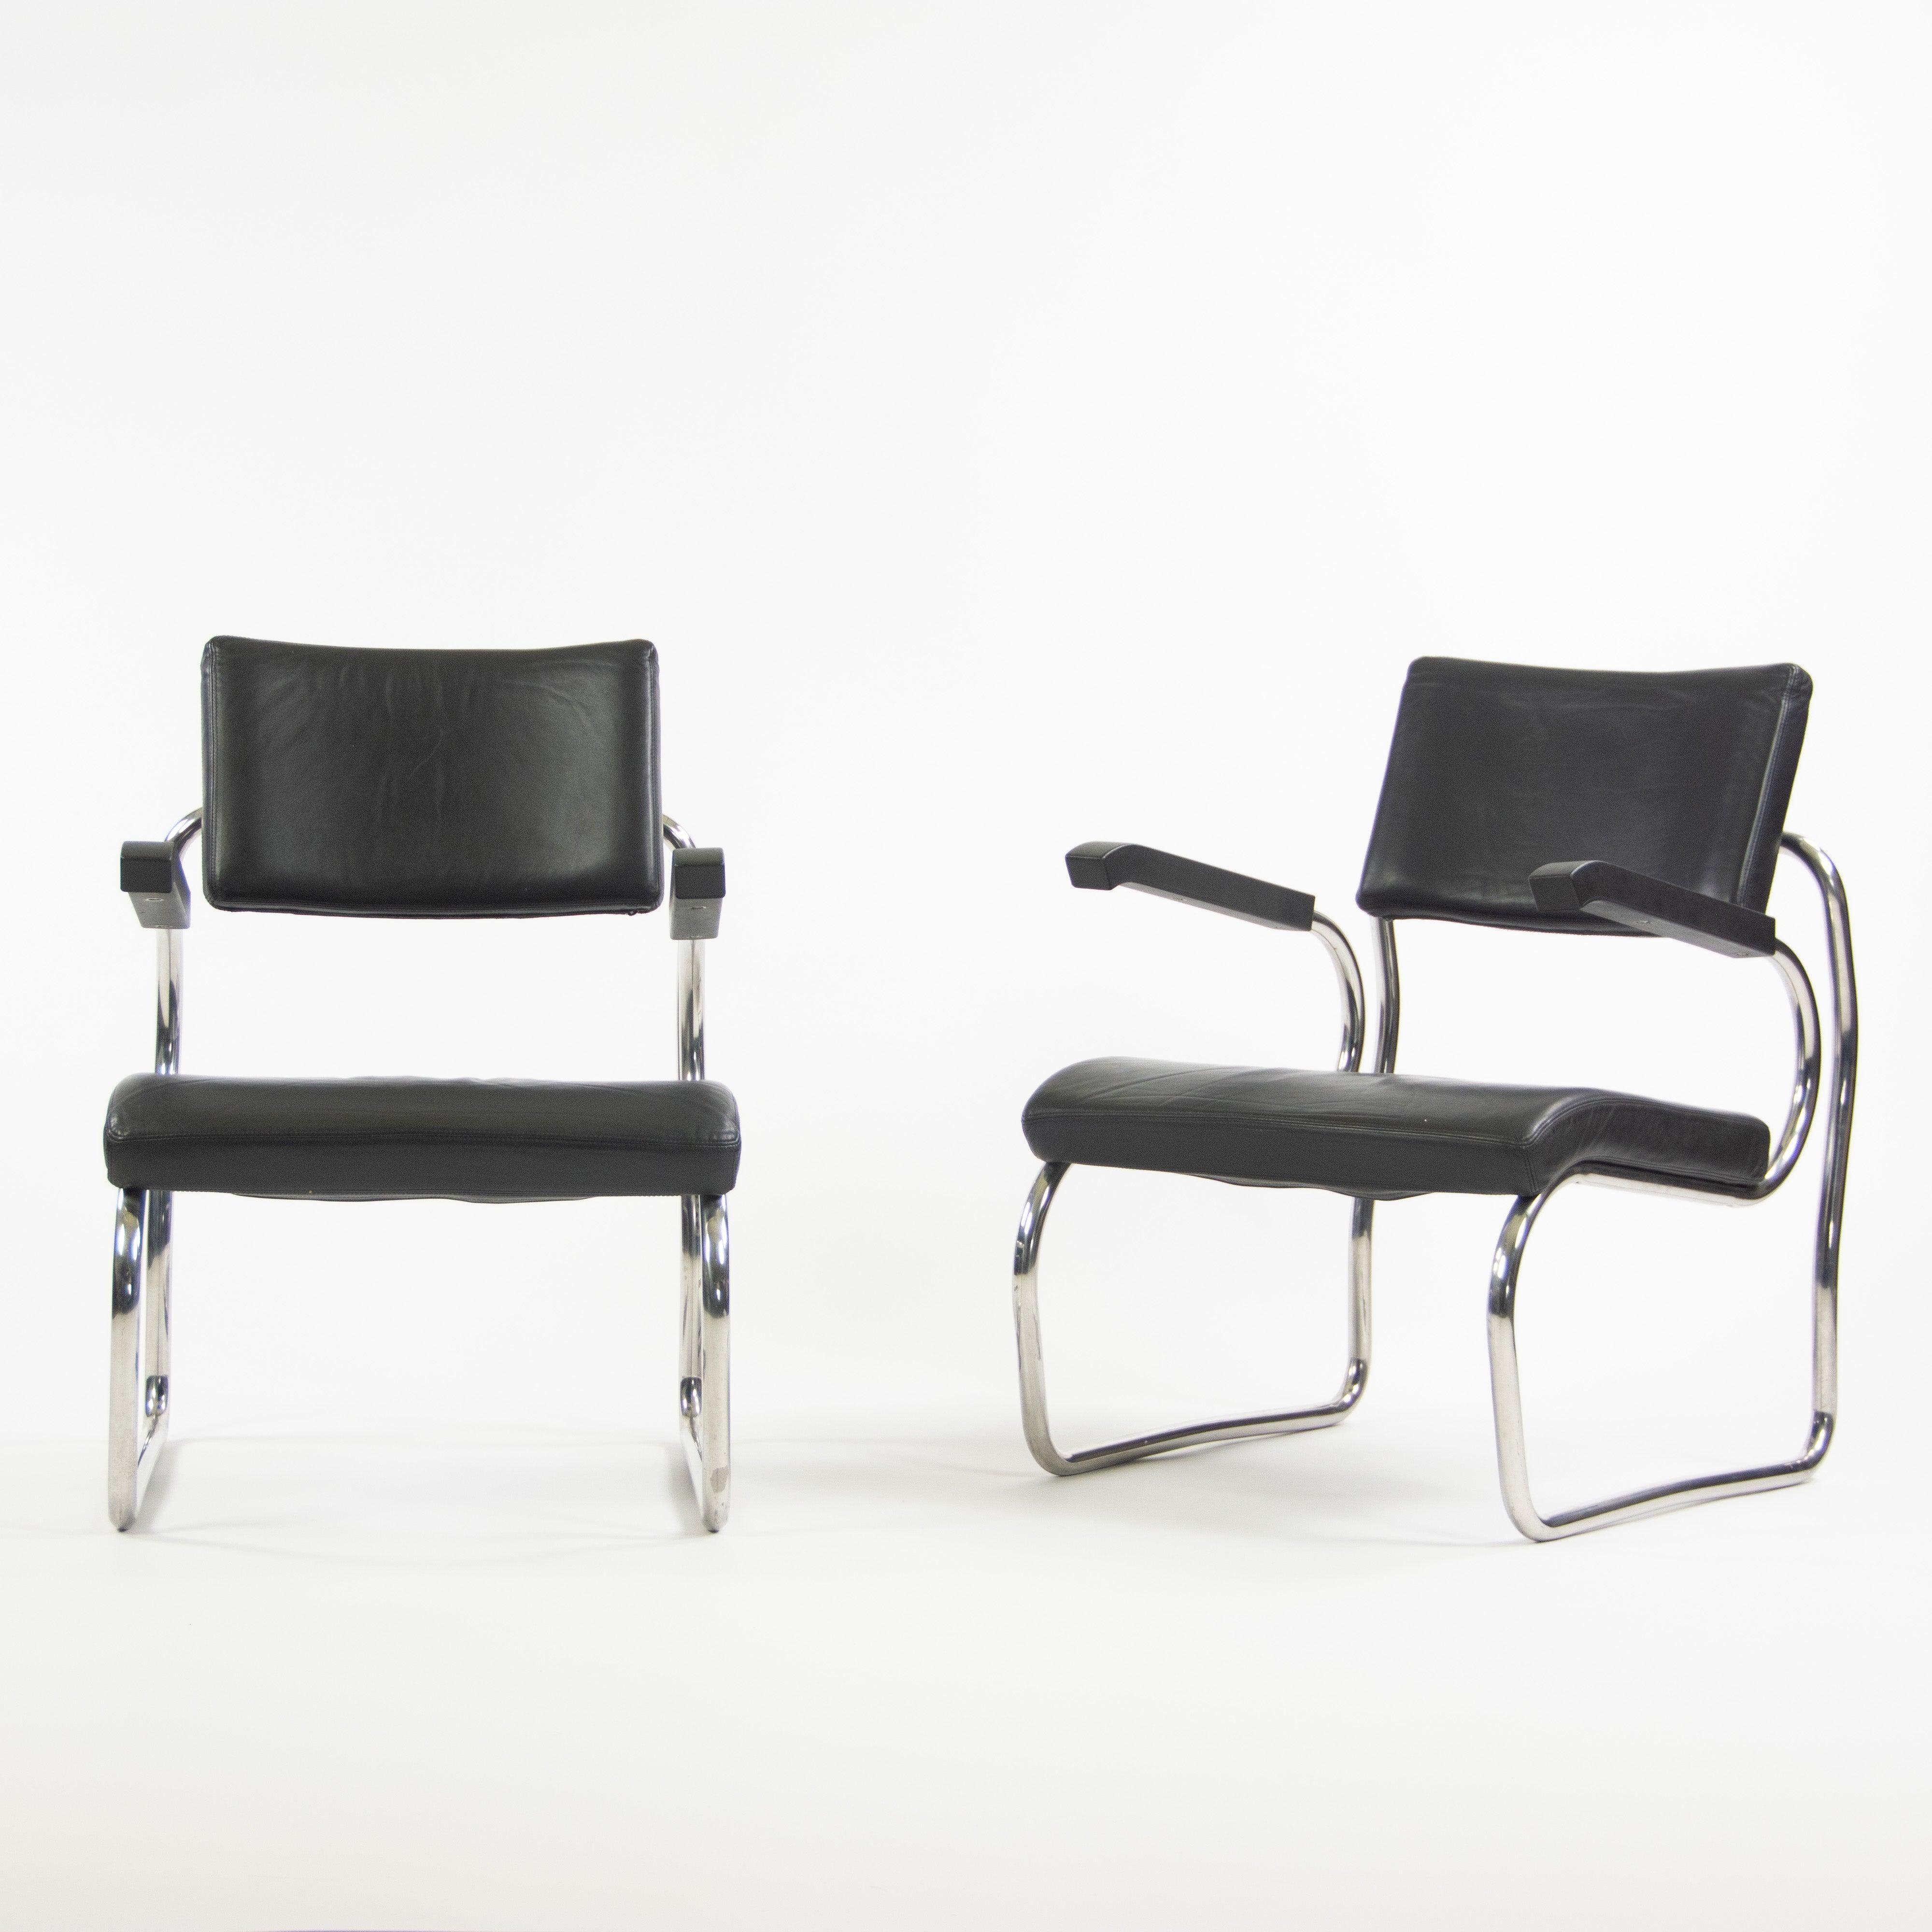 Listed for sale is a pair of gorgeous black leatherSant'elia armchairs by Giuseppe Terragni for Zanotta. These chairs are very difficult to come by. They are constructed from tubular stainless steel material.

These examples are in very good to